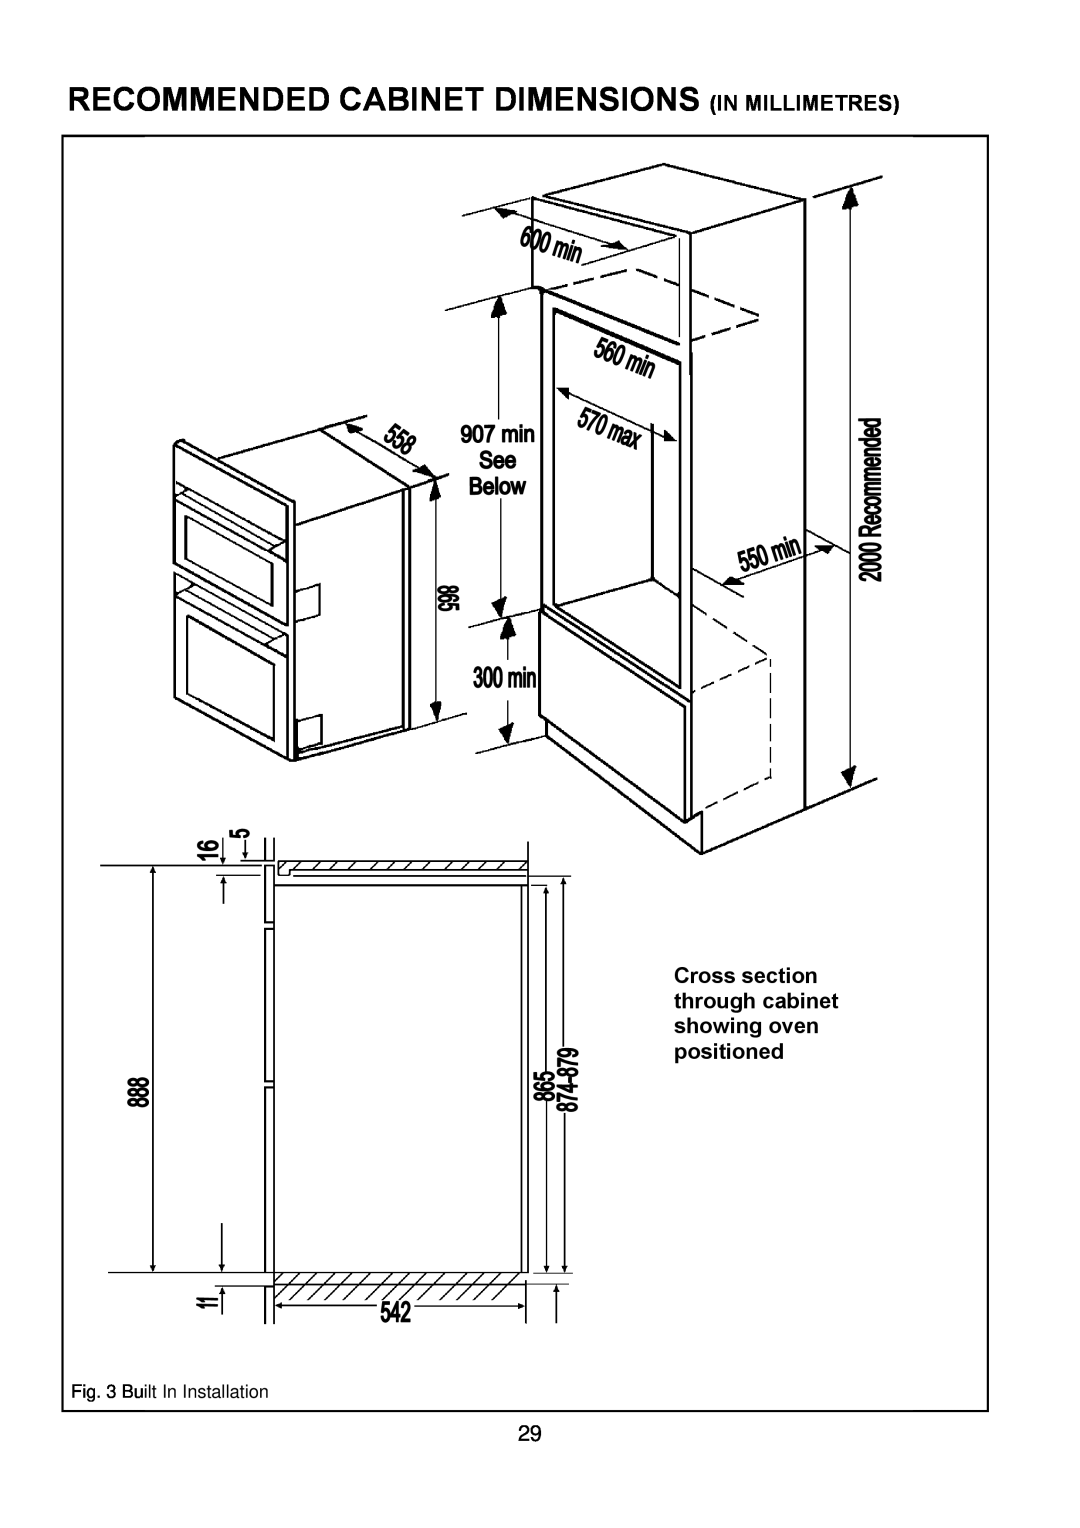 Tricity Bendix TBD950 Recommended Cabinet Dimensions In Millimetres, Cross section through cabinet showing oven positioned 